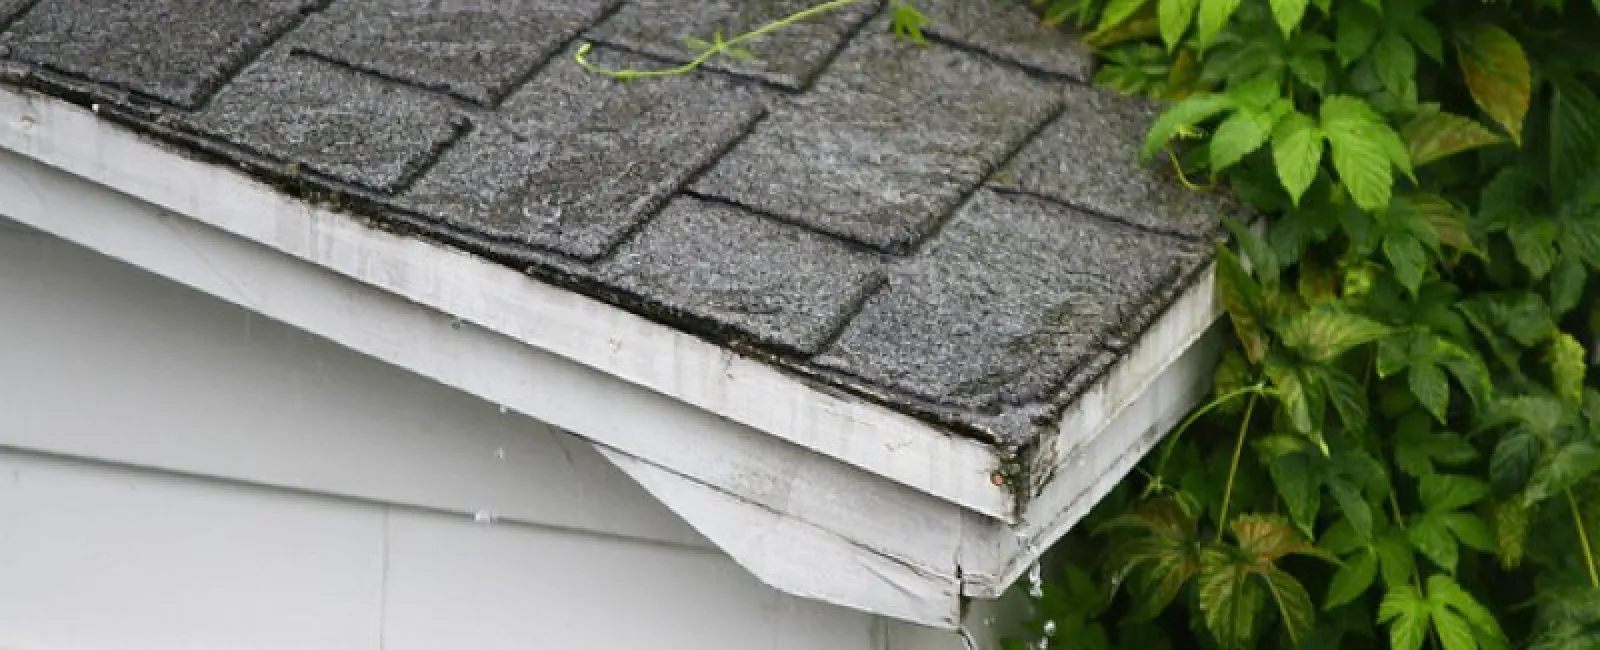 Roof Shingles: Granules and Granule Problems